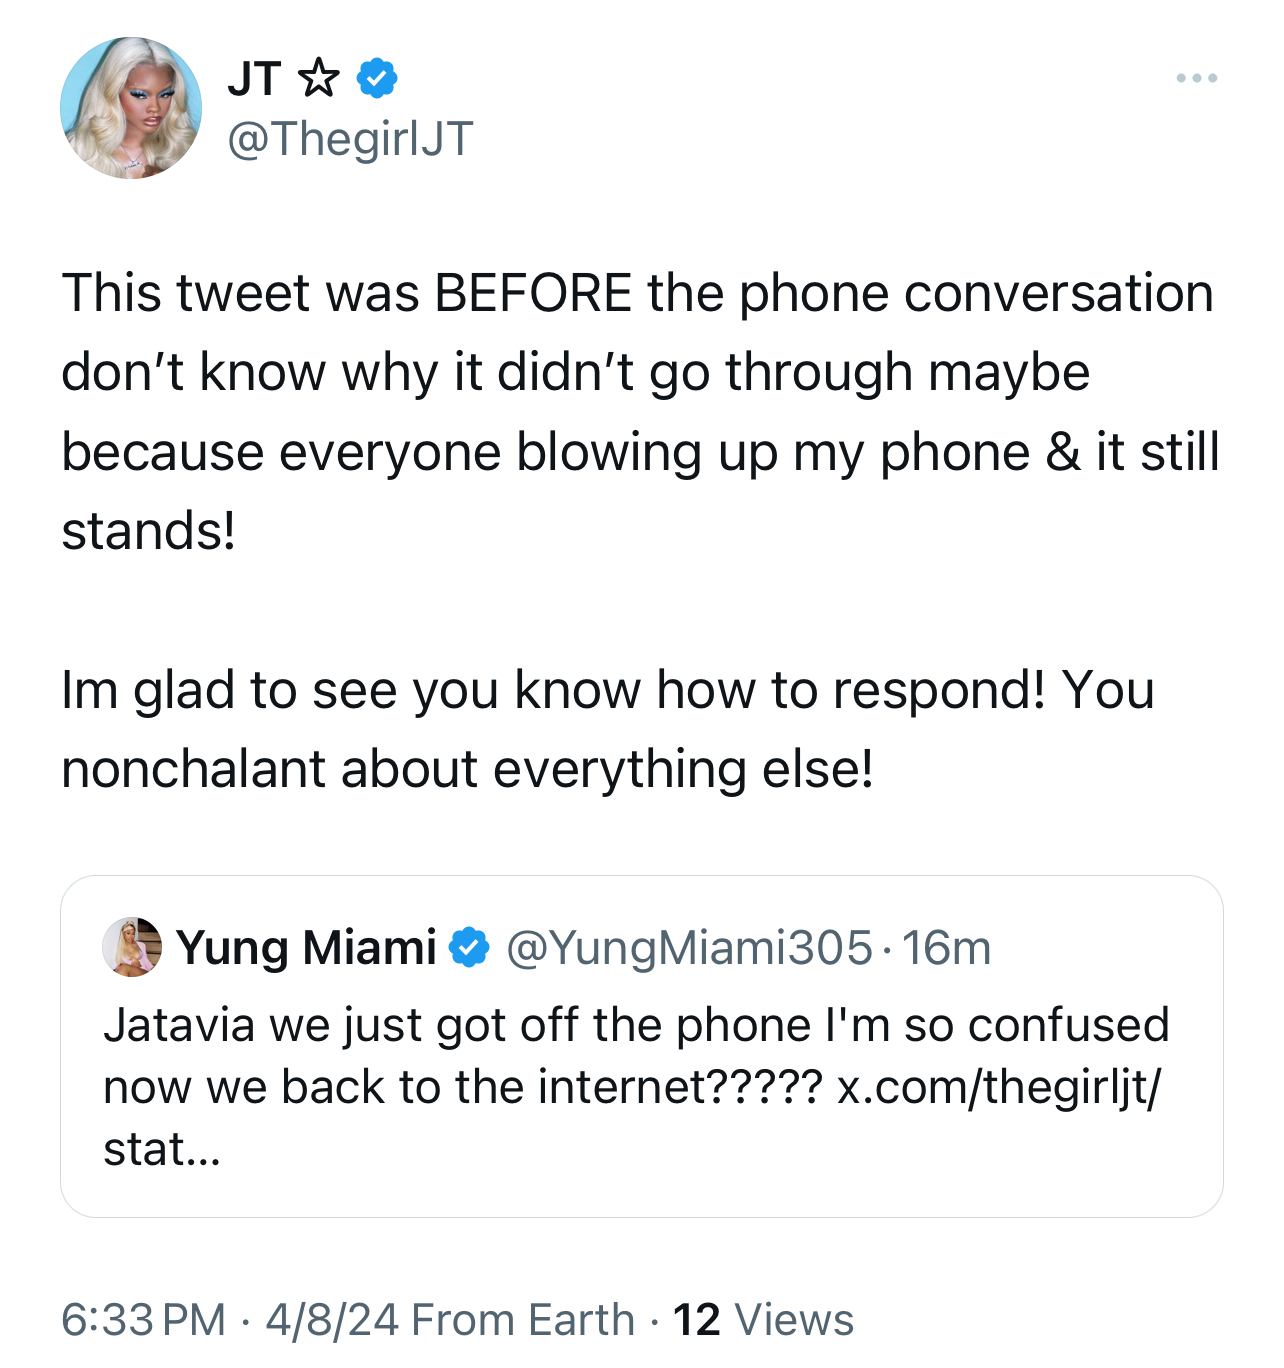 Tweet by JT expressing frustration over phone calls interrupting her response to Yung Miami&#x27;s tweet about confusion on the internet